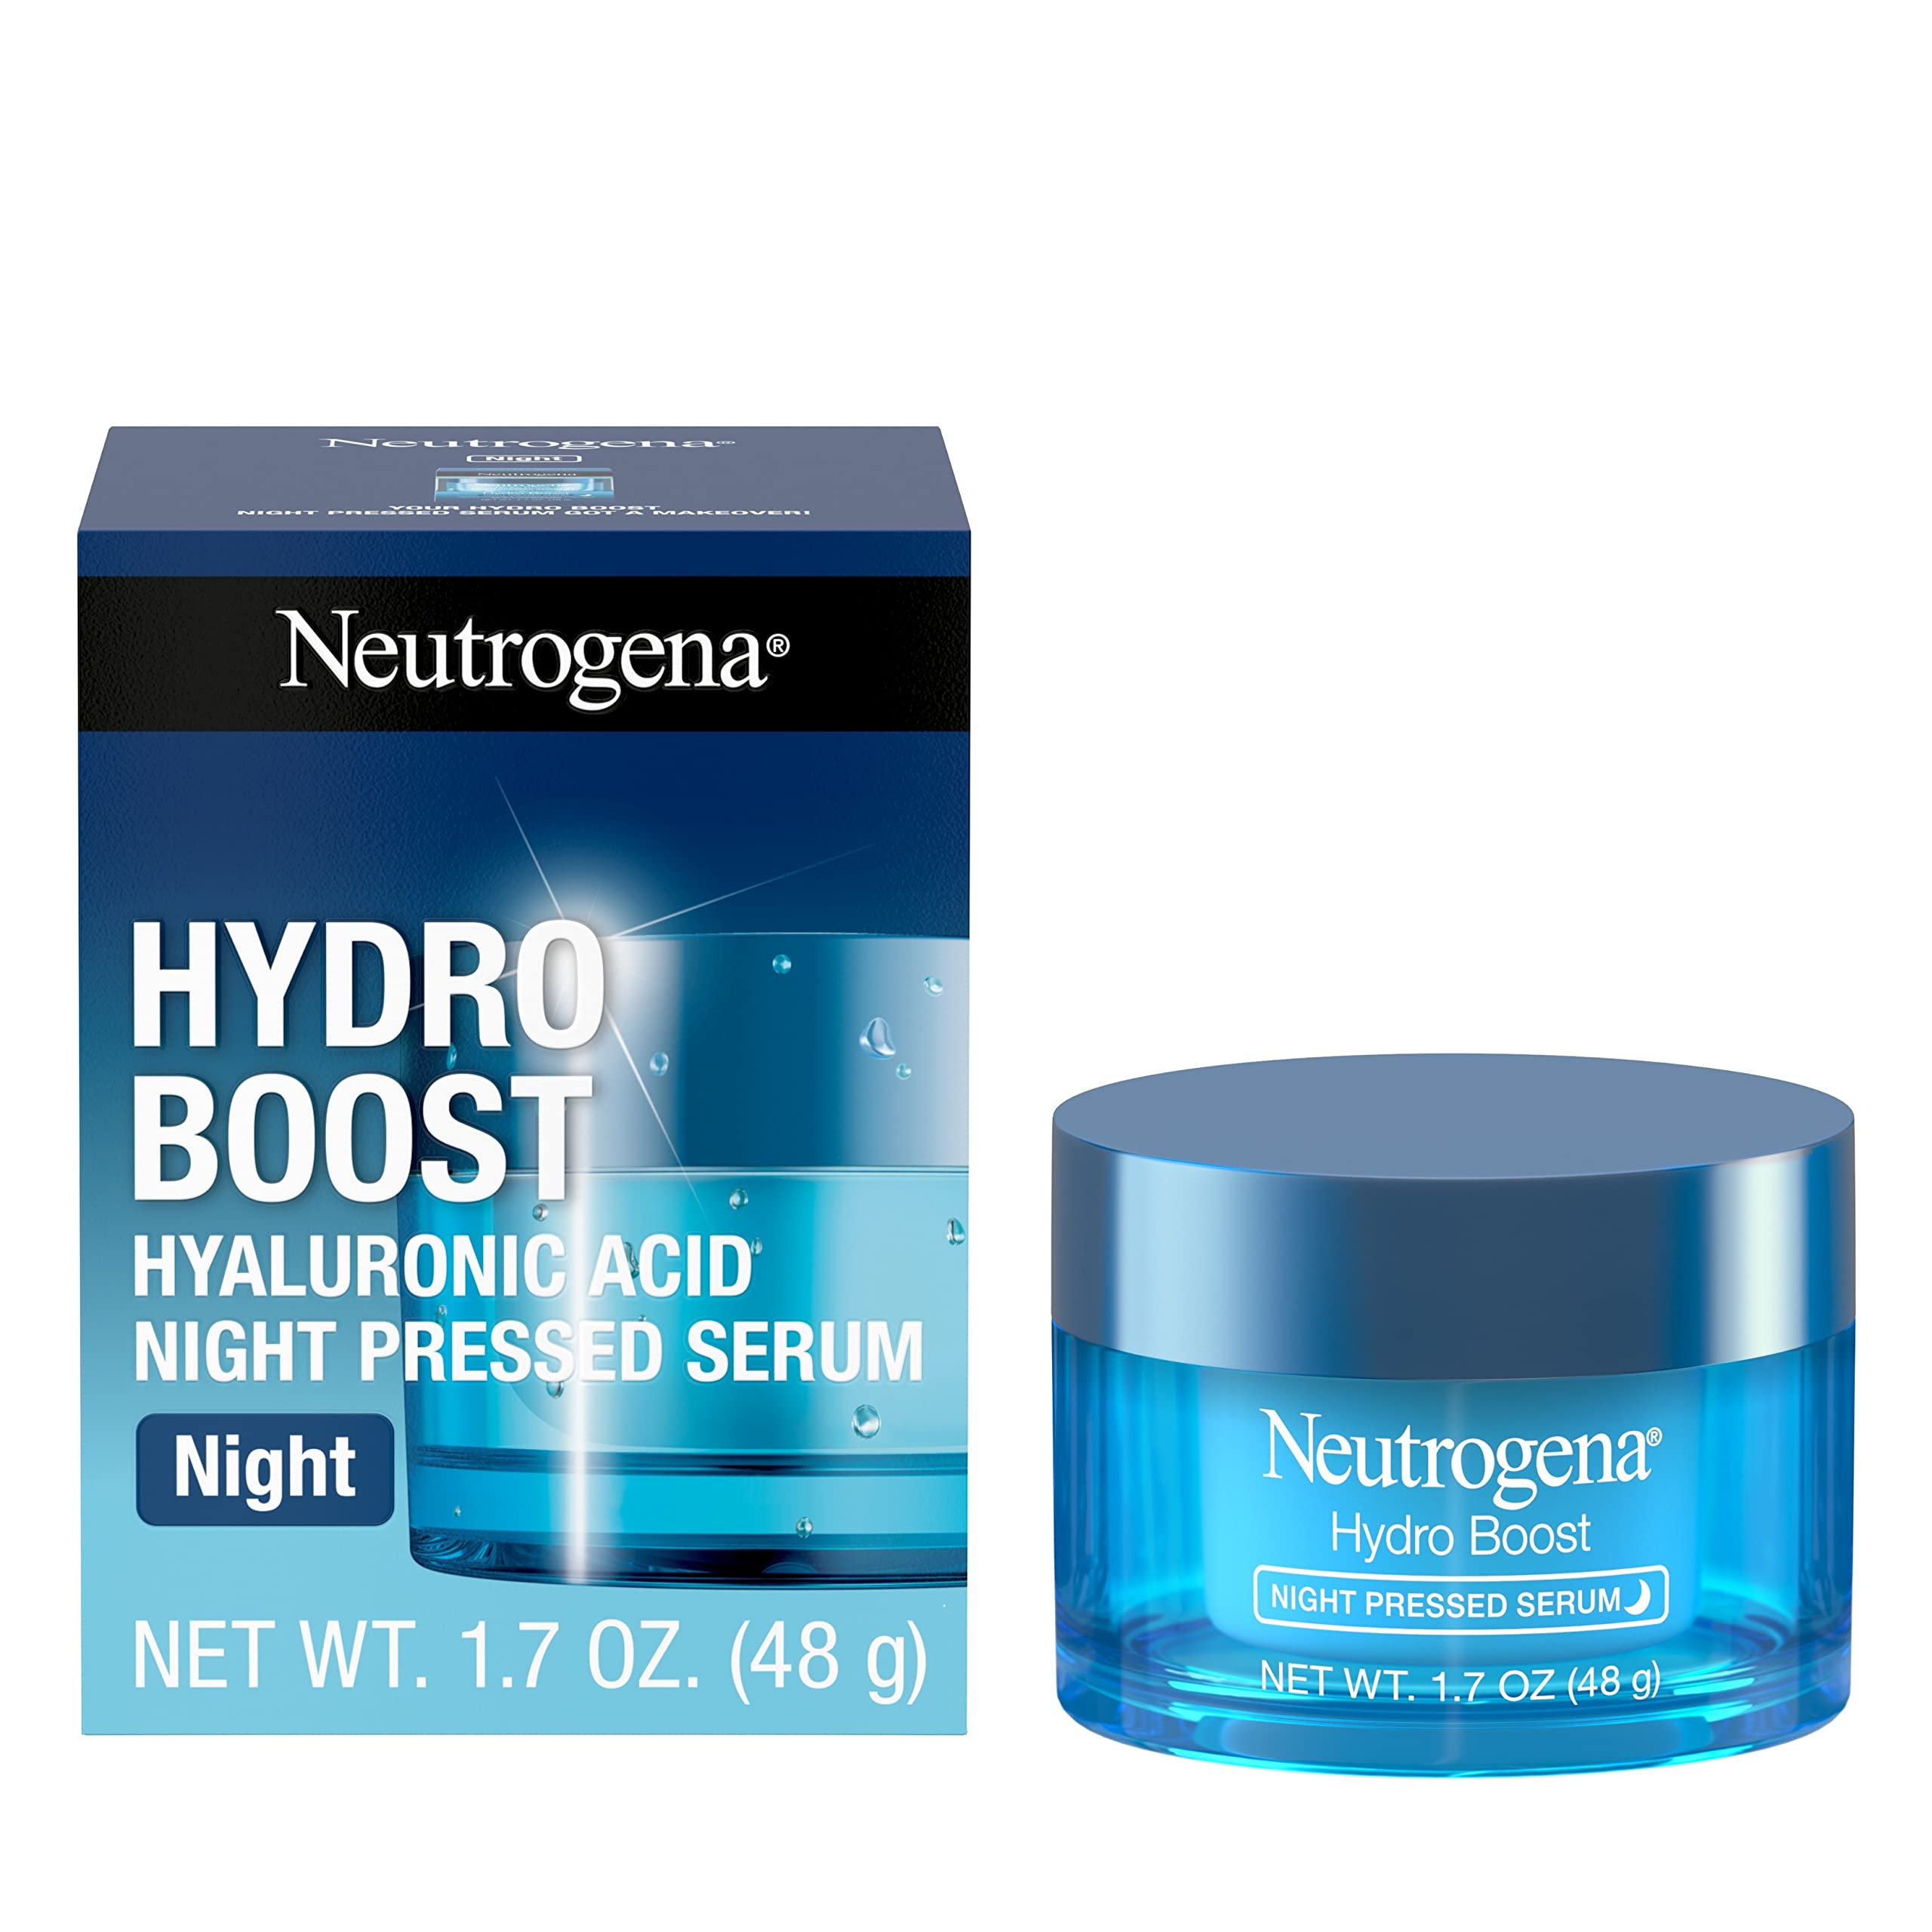 Neutrogena Hydro Boost Night Moisturizer for Face, Hyaluronic Acid Facial Serum for Dry Skin, Oil-Free and Non-Comedogenic, 1.7 oz